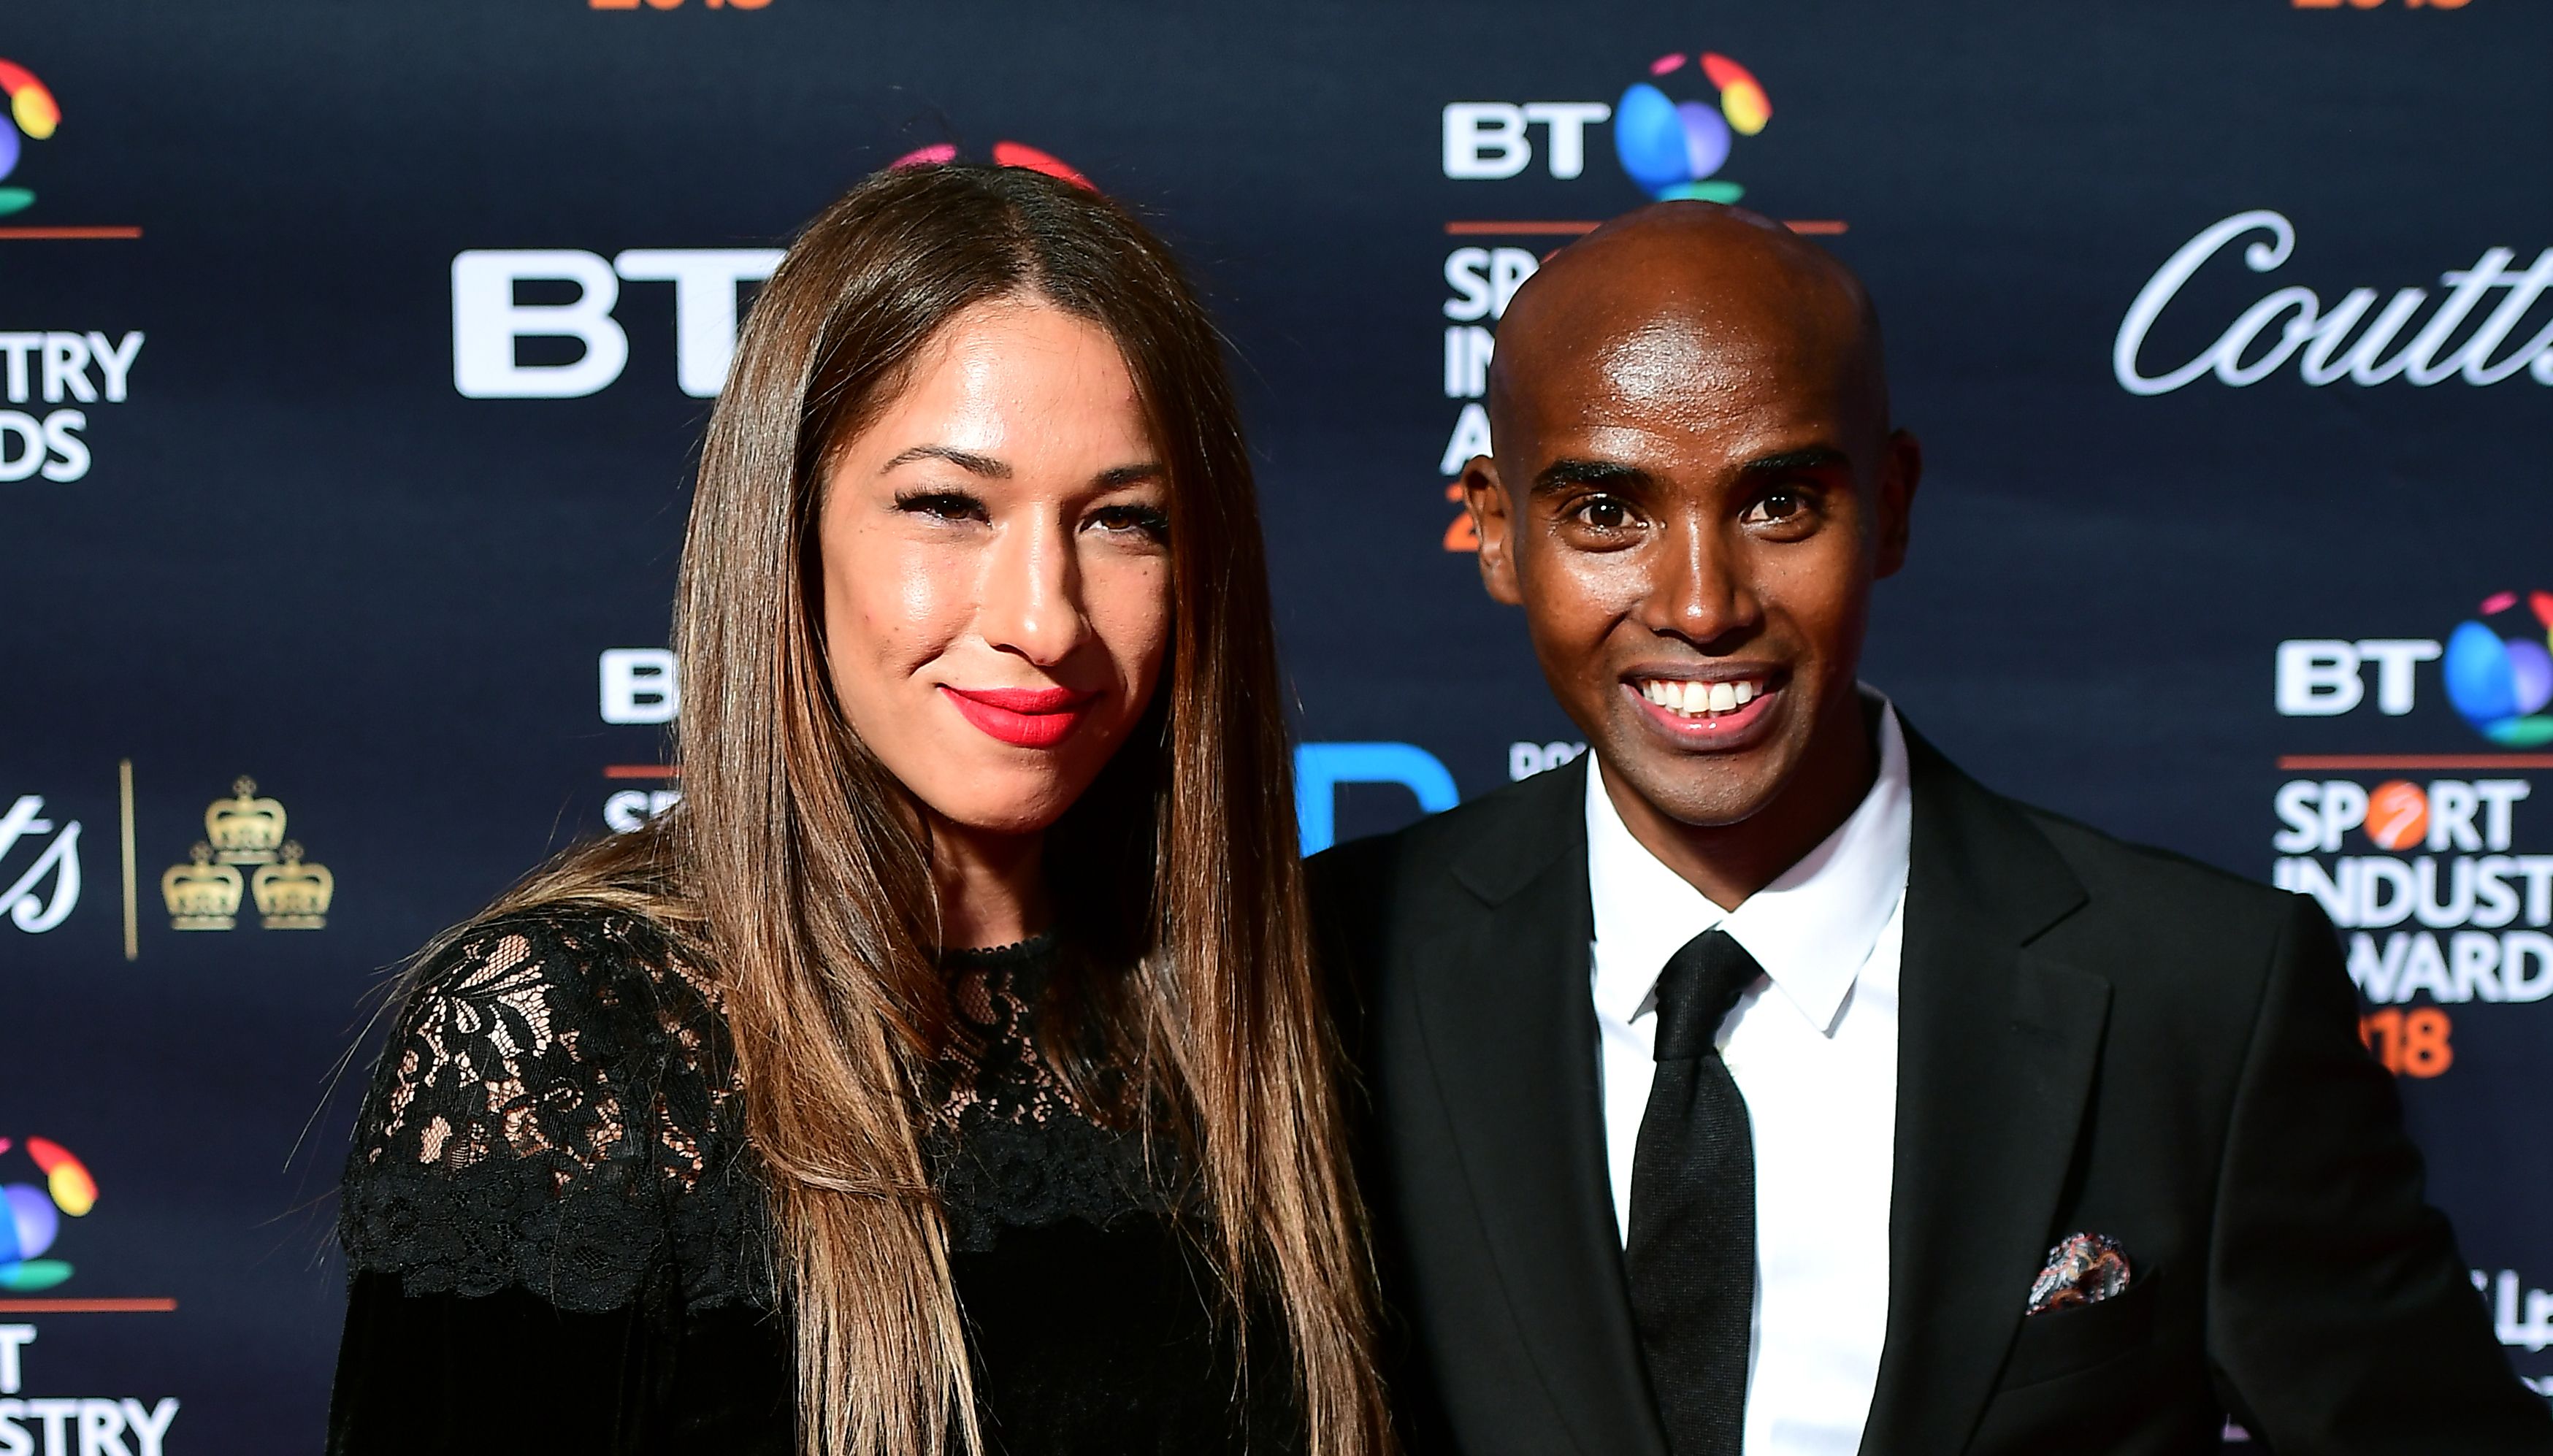 Sir Mo Farah (right) and wife Tania Nell with the Outstanding Contribution to Sport Award at the BT Sport Industry Awards 2018